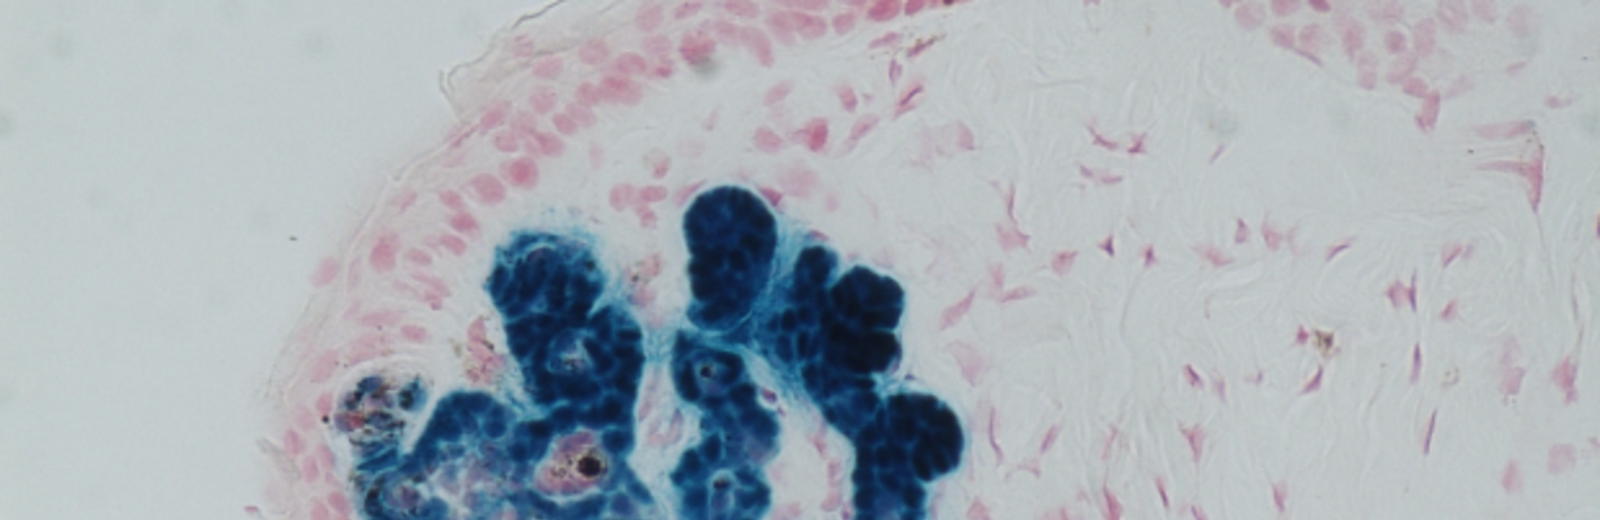 This image shows a tumour